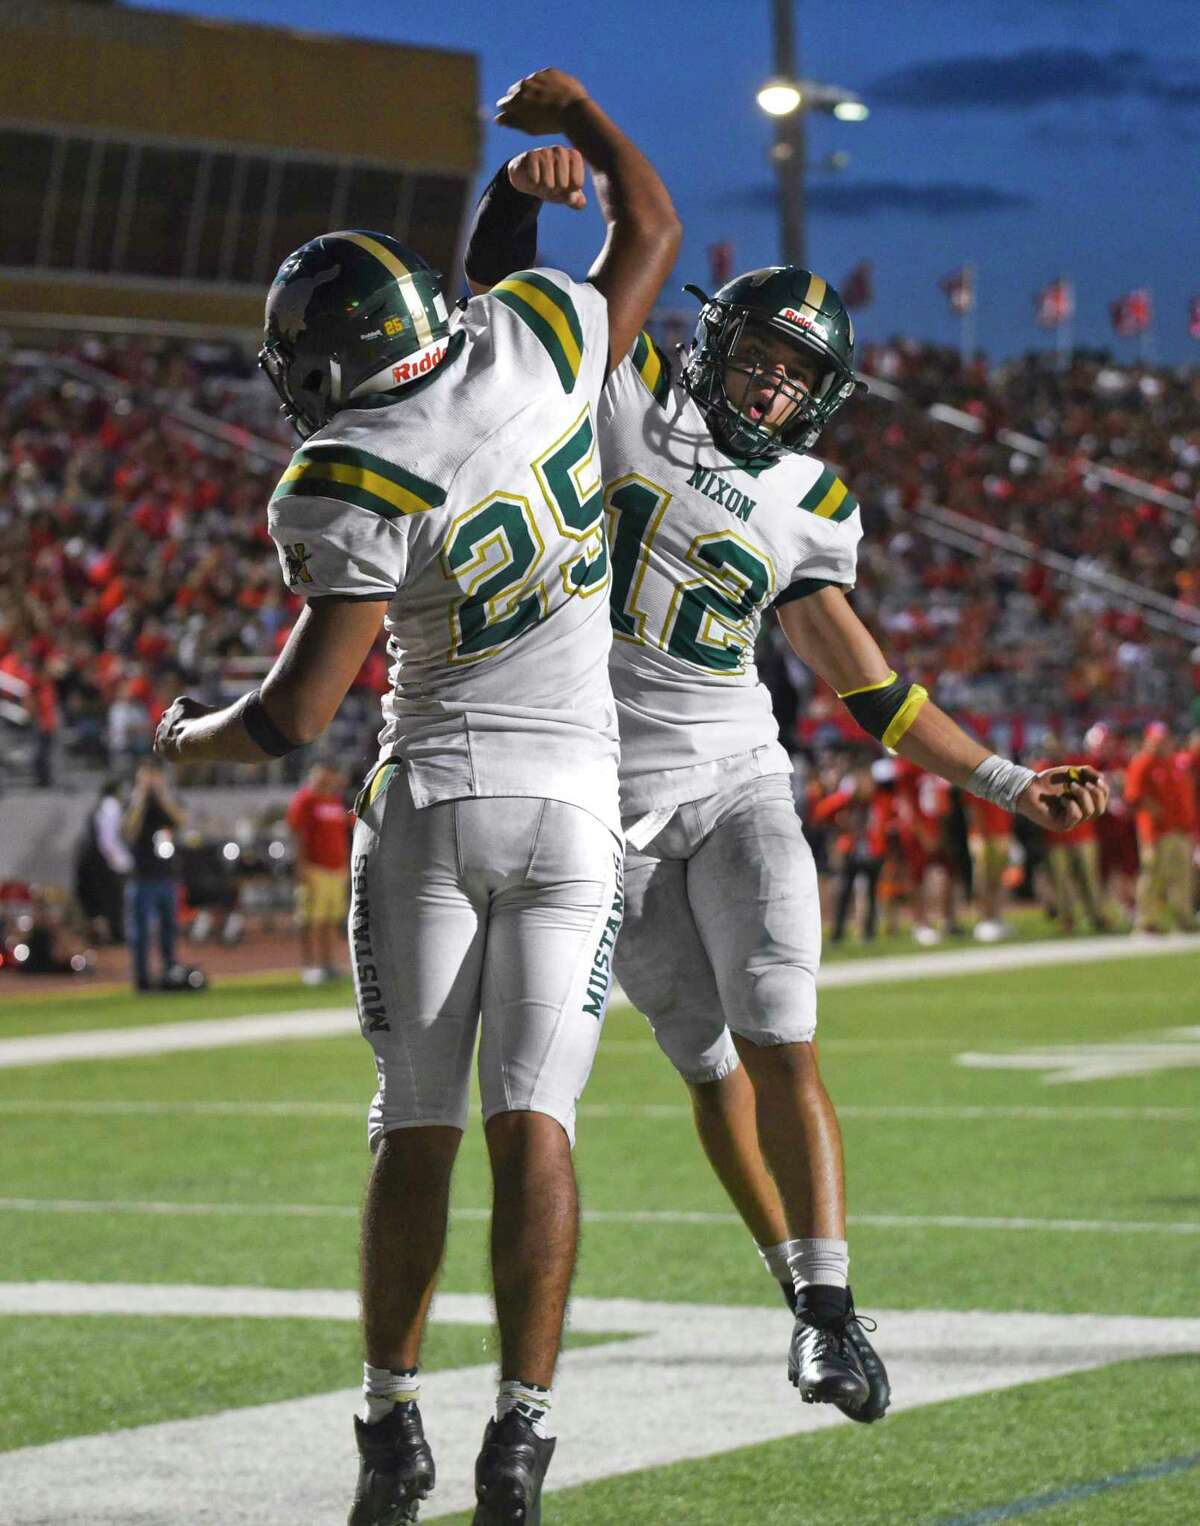 Pablo Tovar and Joseph Ibarra celebrate a touchdown Friday in Nixon’s 33-30 win over rival Martin at Shirley Field.